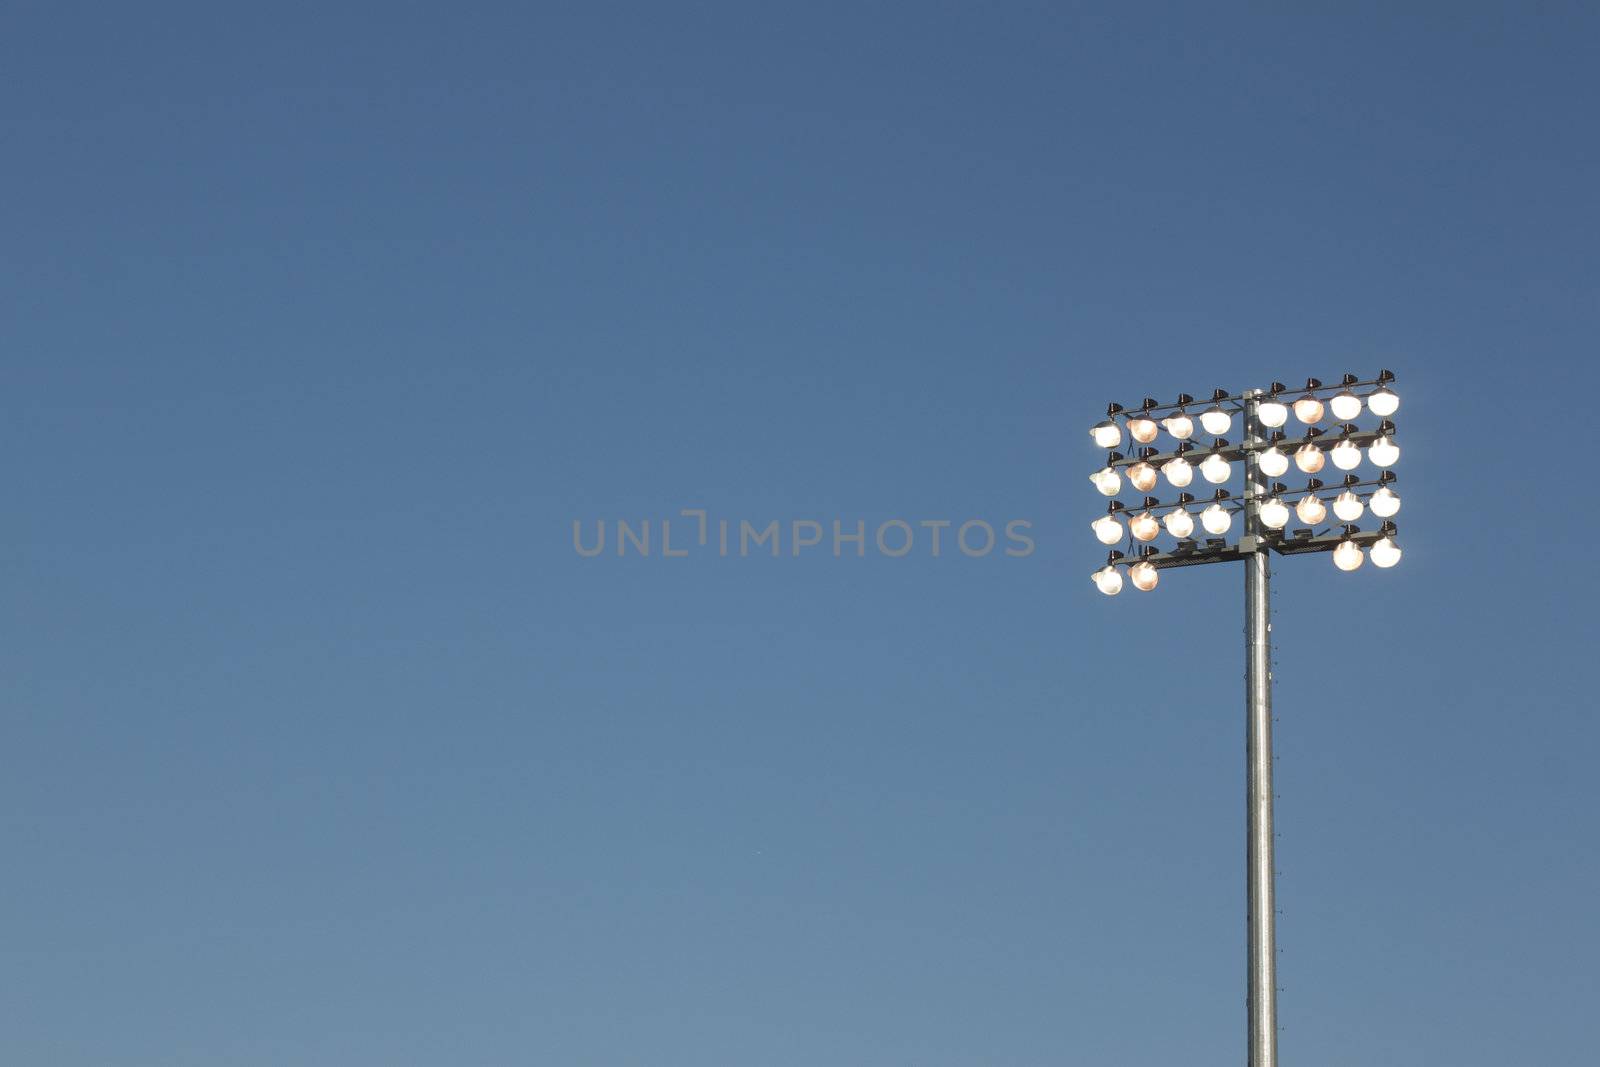 Stadium lights on a blue sky background. could be used for football, soccer, baseball, etc.